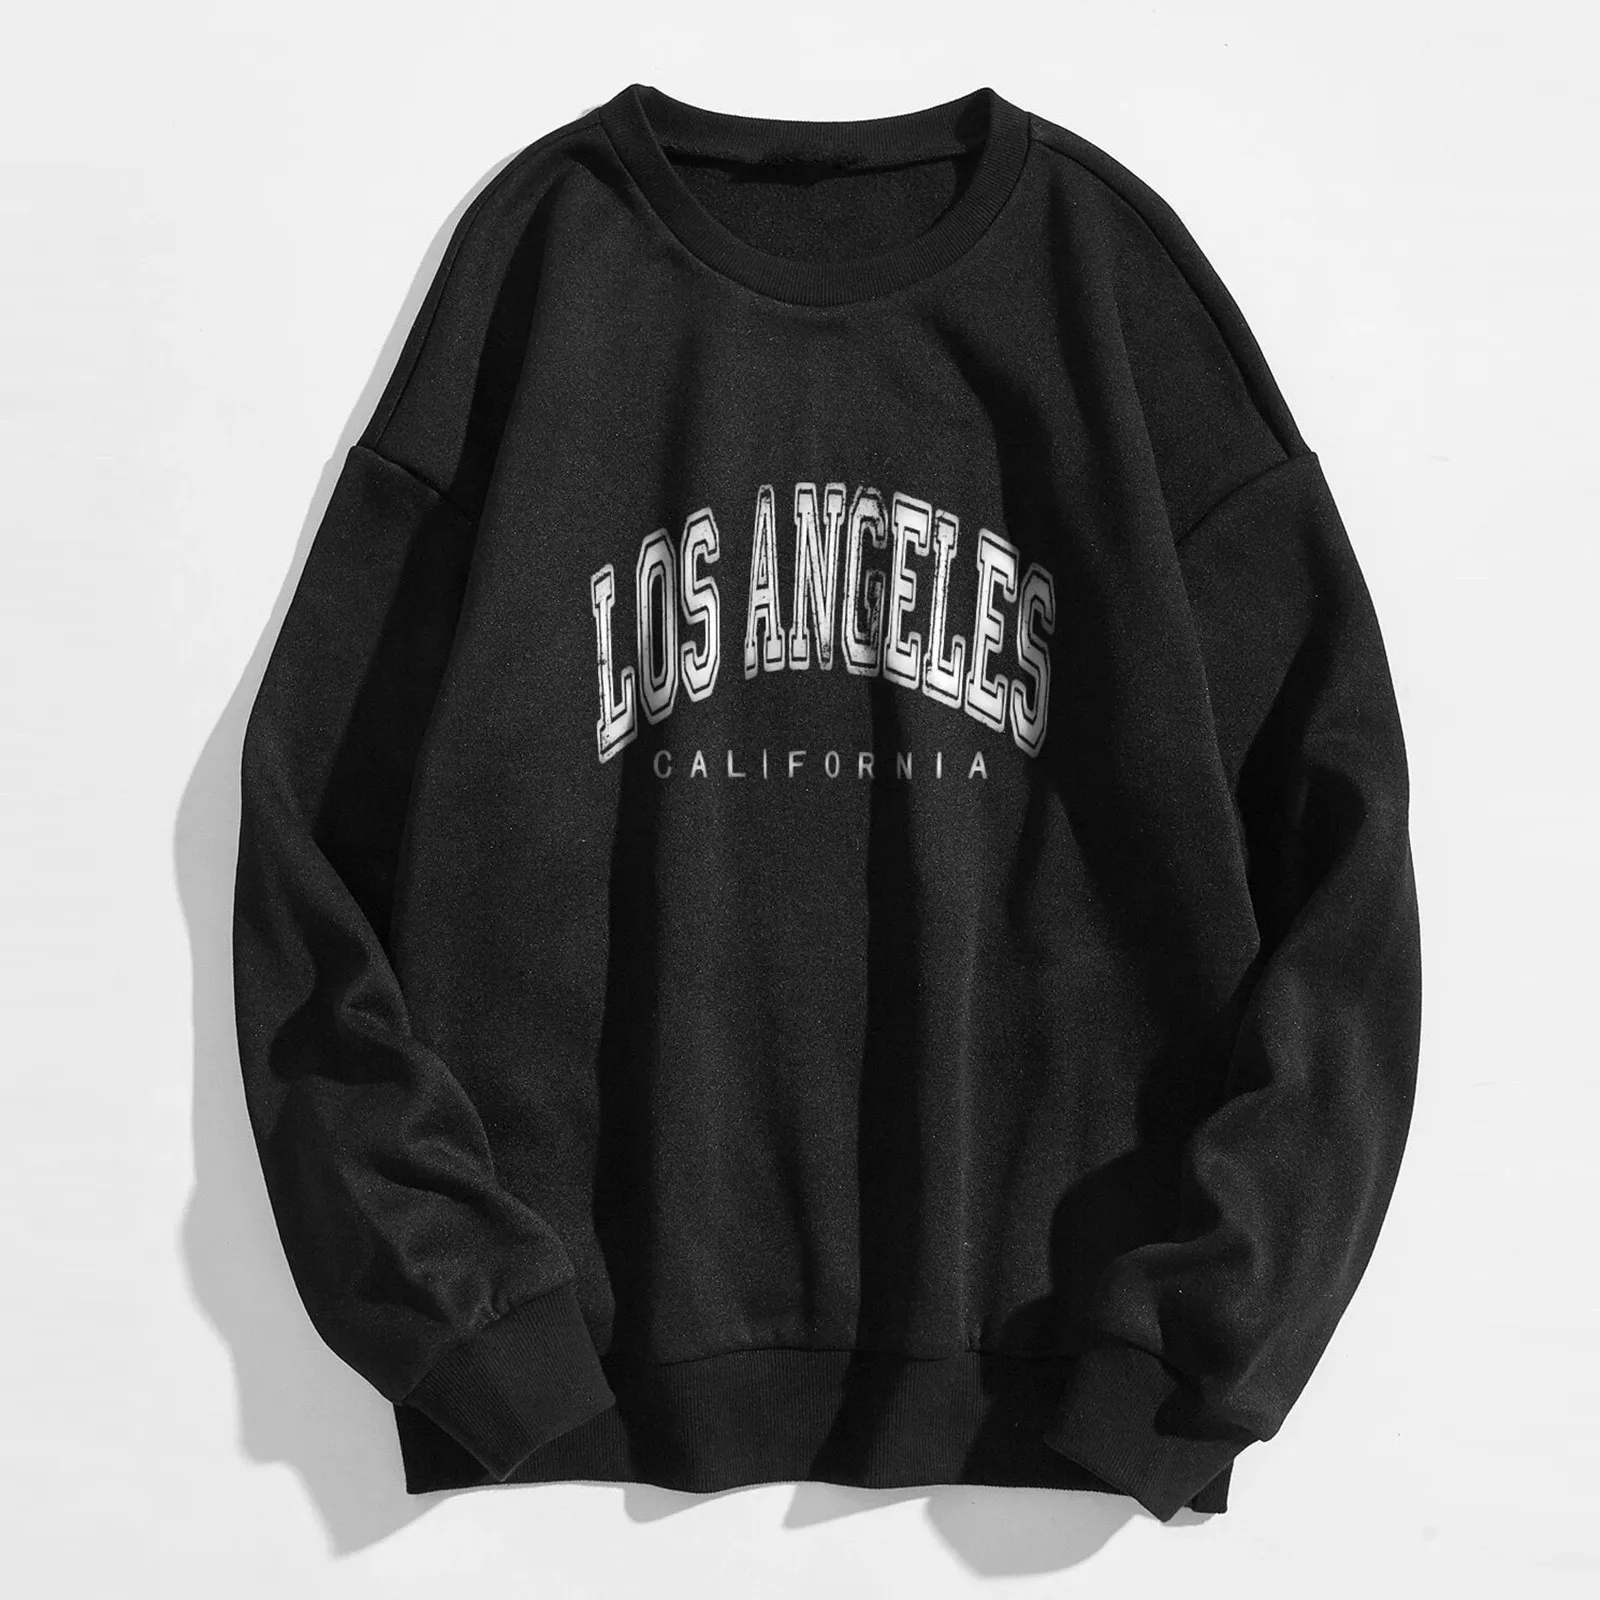 NEW Fashion harajuku Womens Letters los angeles Print Long Sleeve Hoodie Sweatshirt Ladies Slouch Pullover Jumper Tops canteloube chants d auvergne angeles jaquillat 1 cd